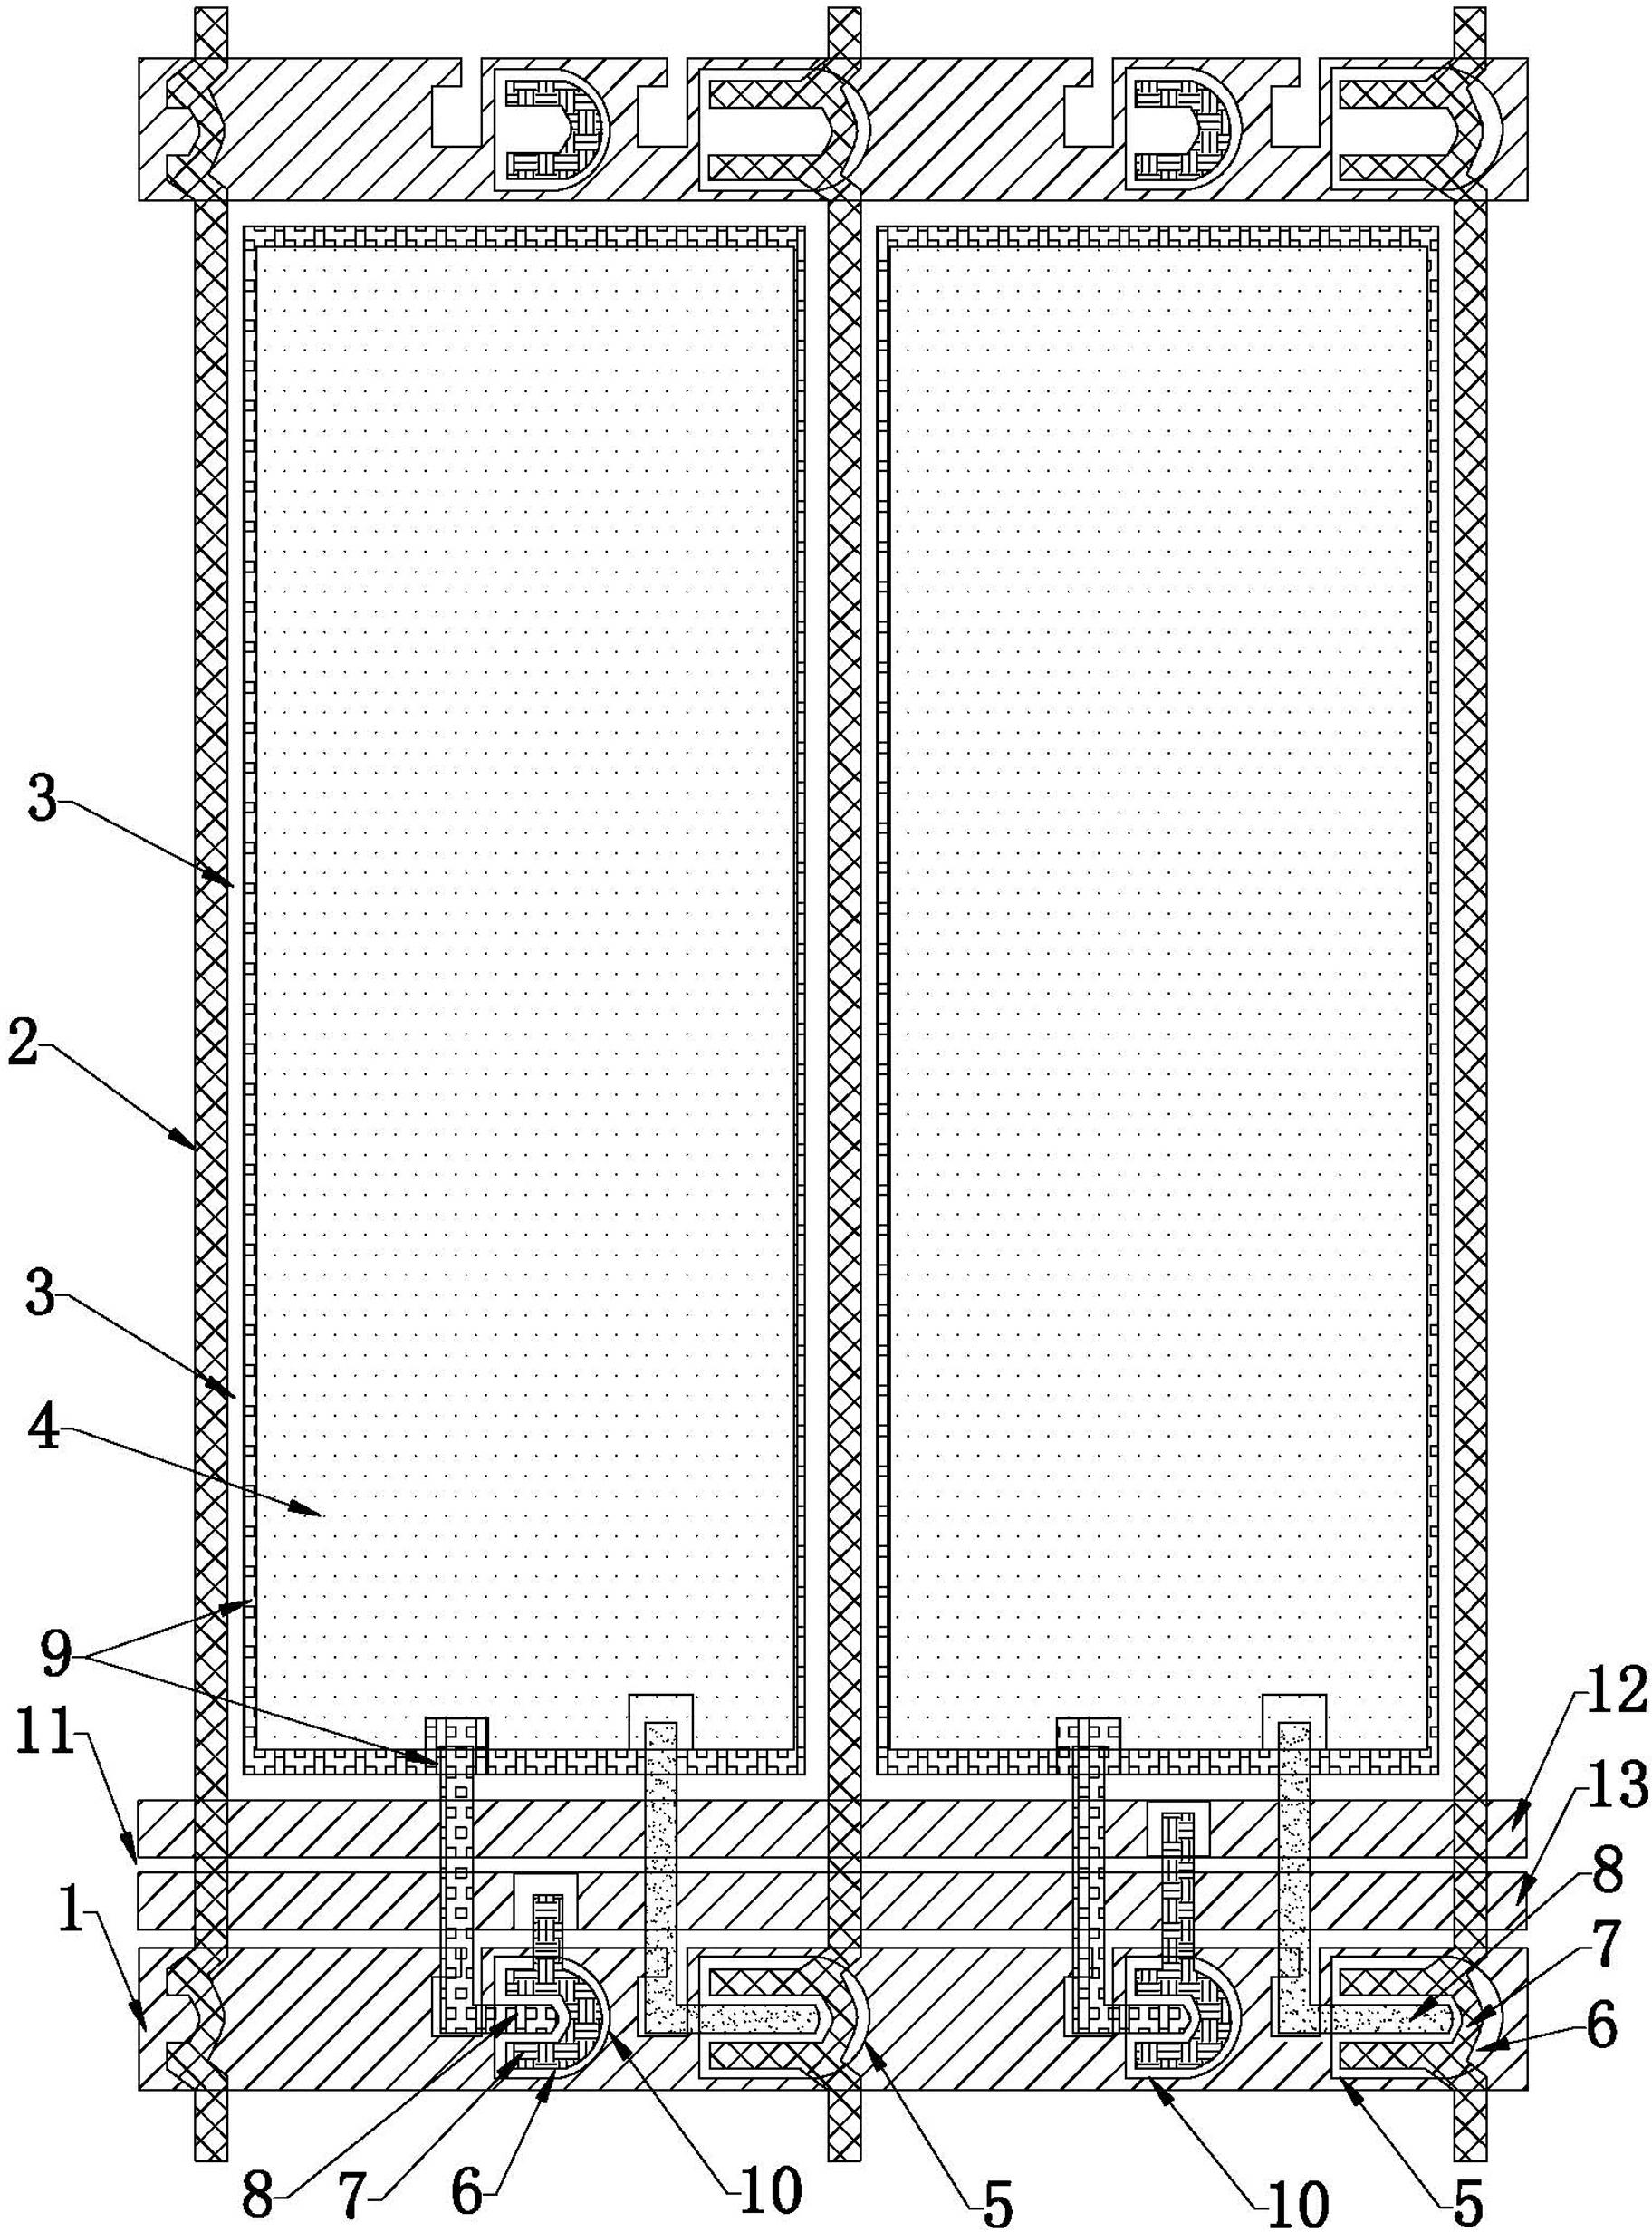 Pixel structure of blue-phase liquid crystal display